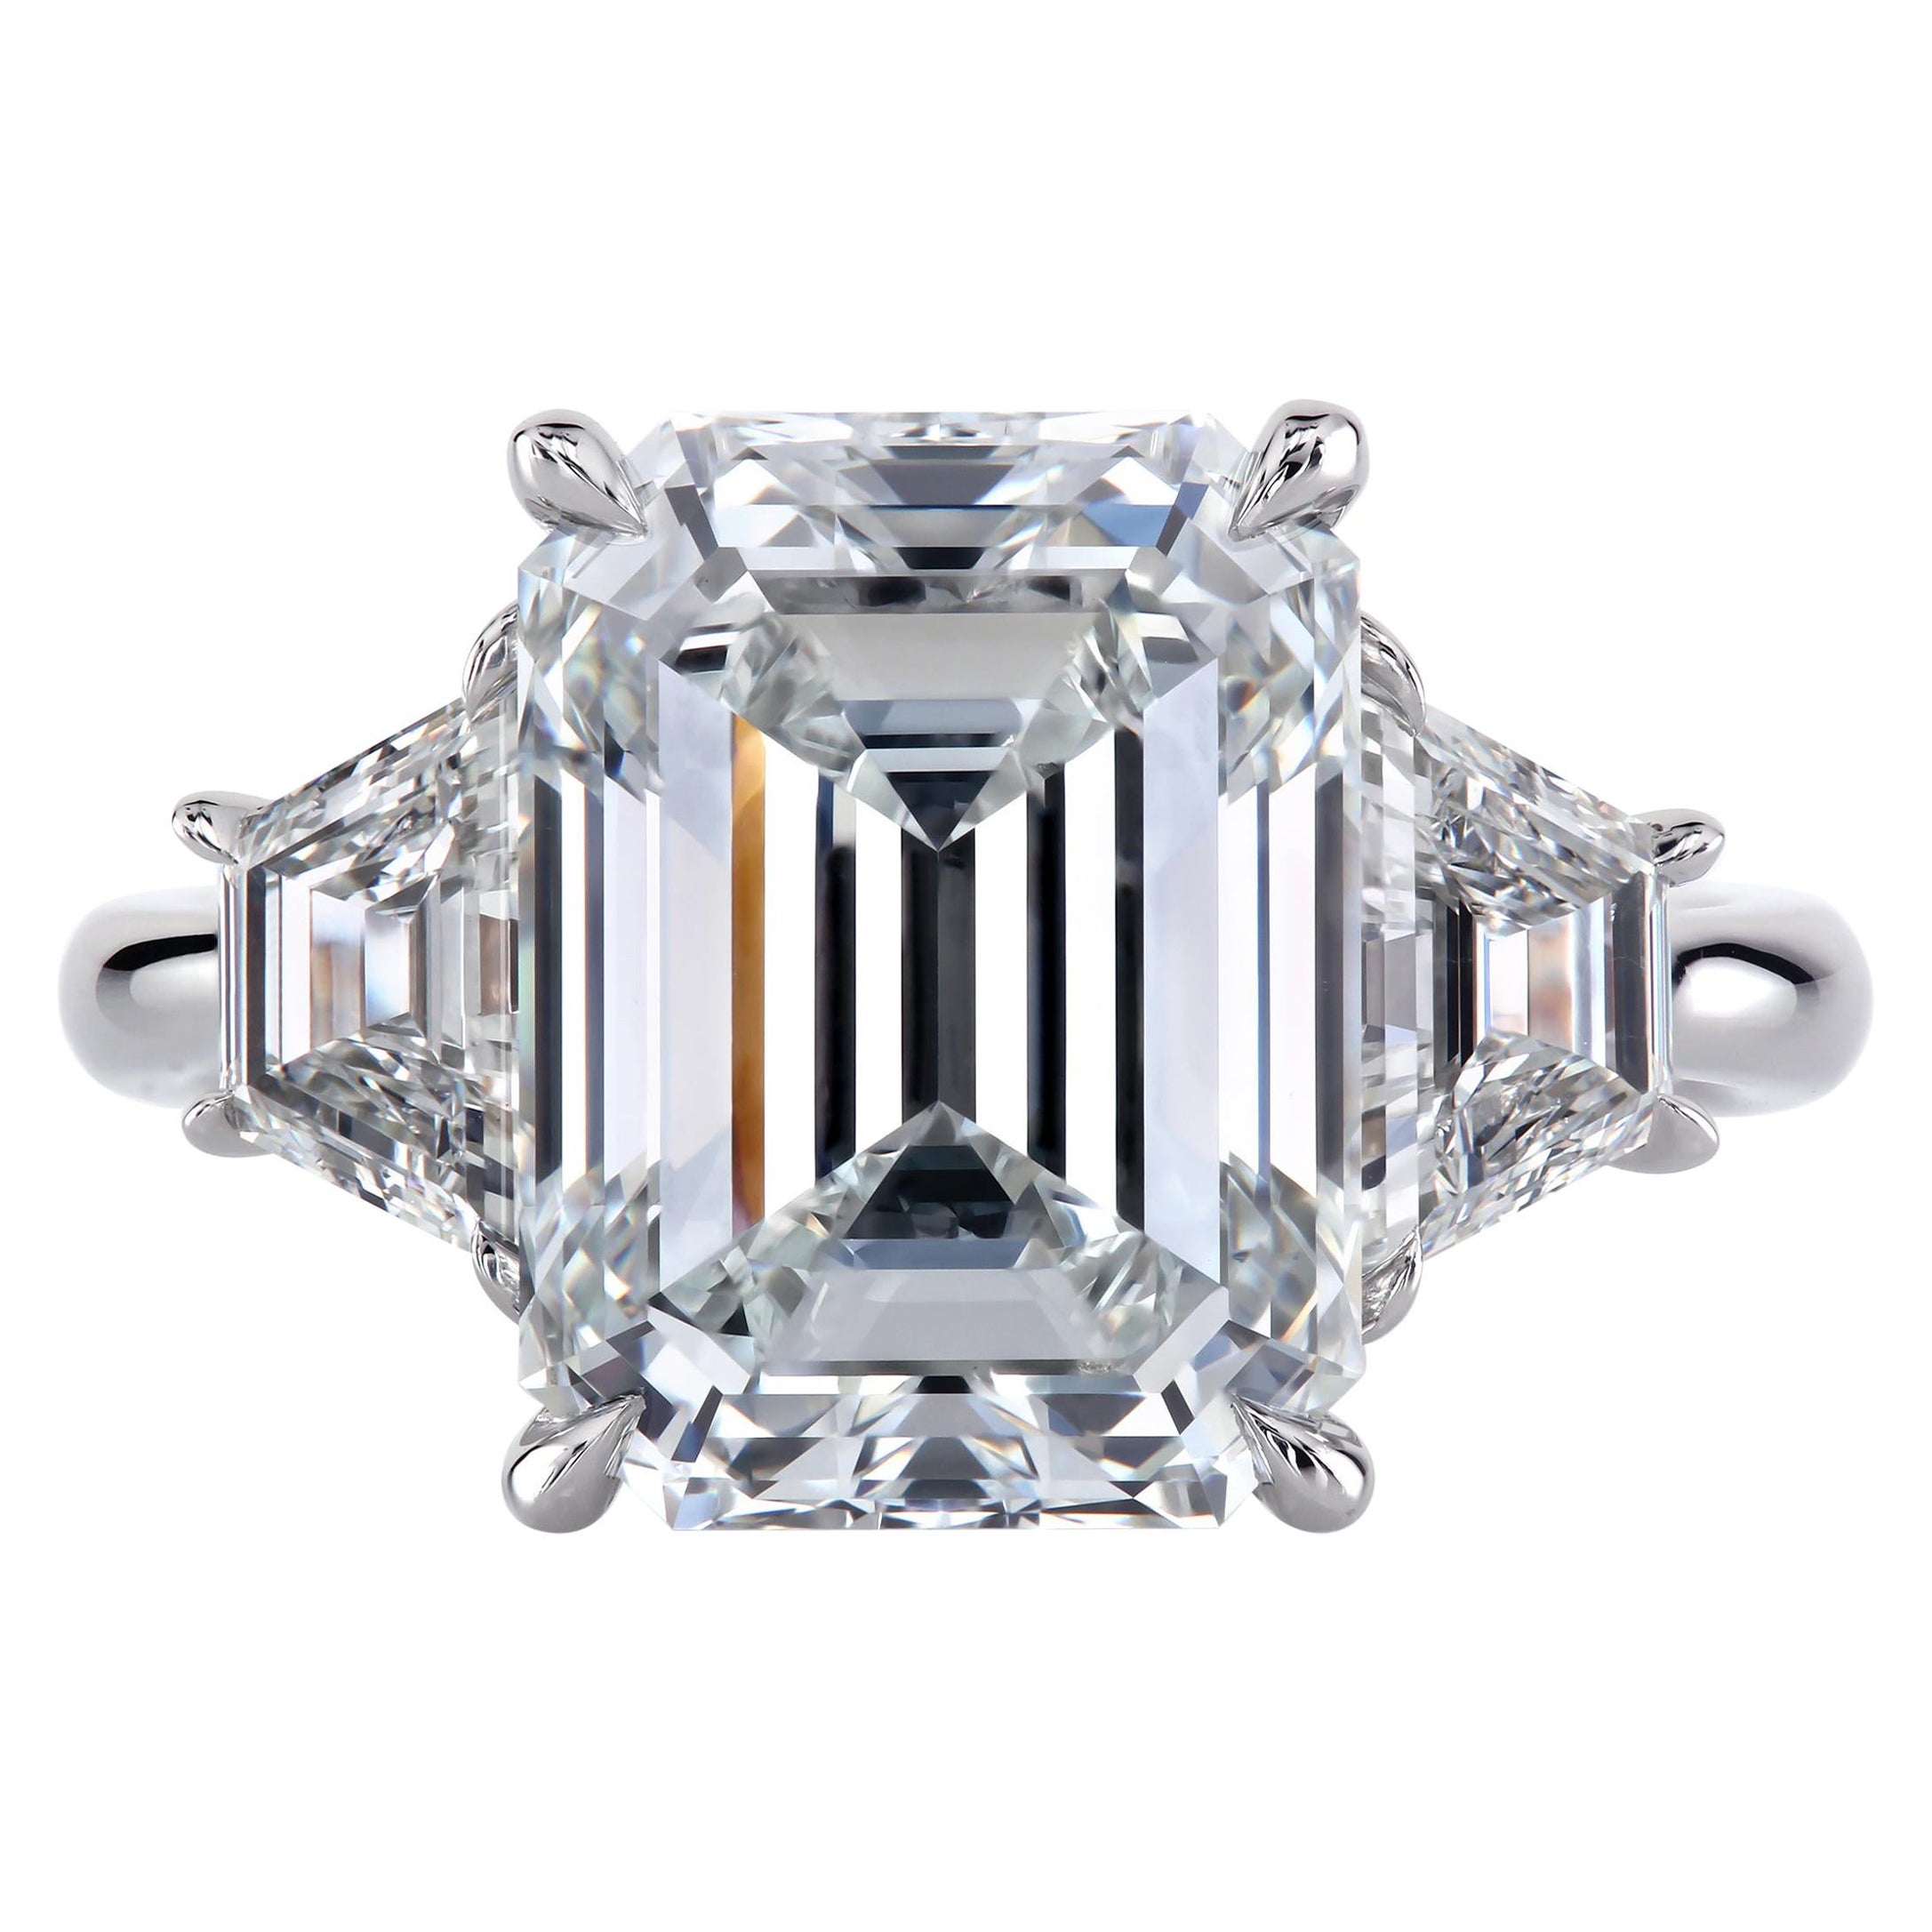 Bespoke three-stone ring with an emerald-cut diamond and a pair of matching step-cut trapezoid diamonds.
All fine details of the design will be discussed before any work begins. The price is inclusive of the GIA-certified 3.01 ct G/ VS1 emerald cut